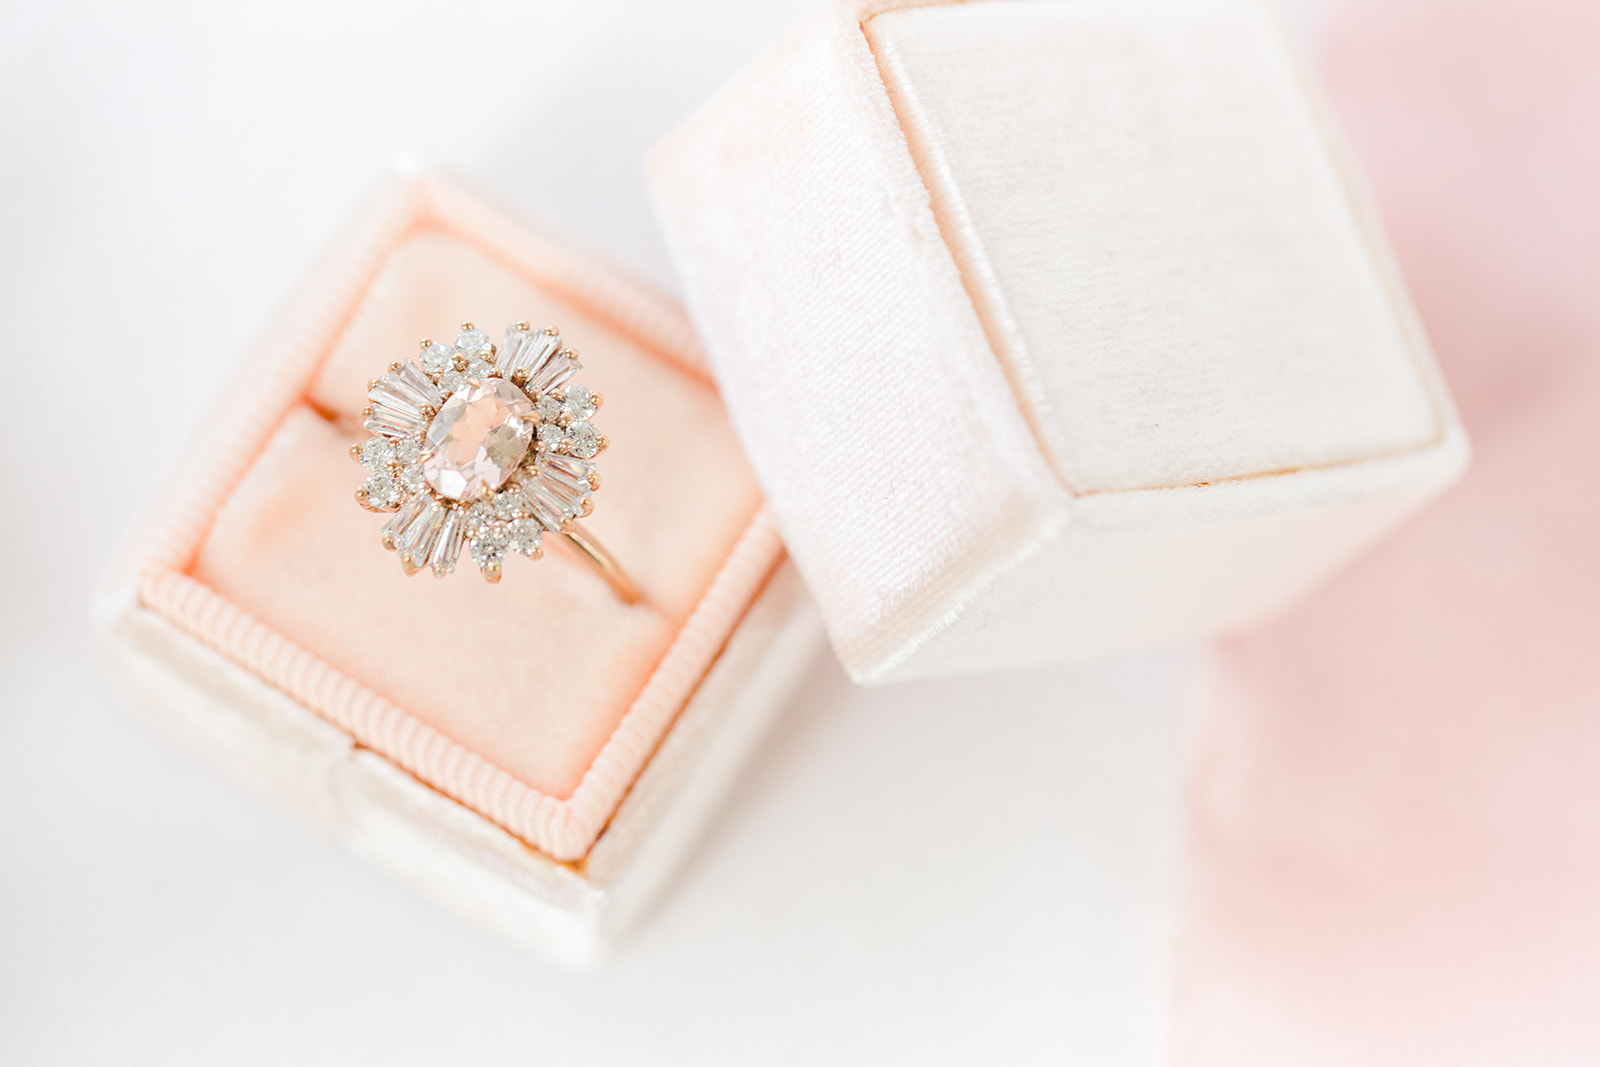 Stunning engagement ring in a pink and white velvet ring box